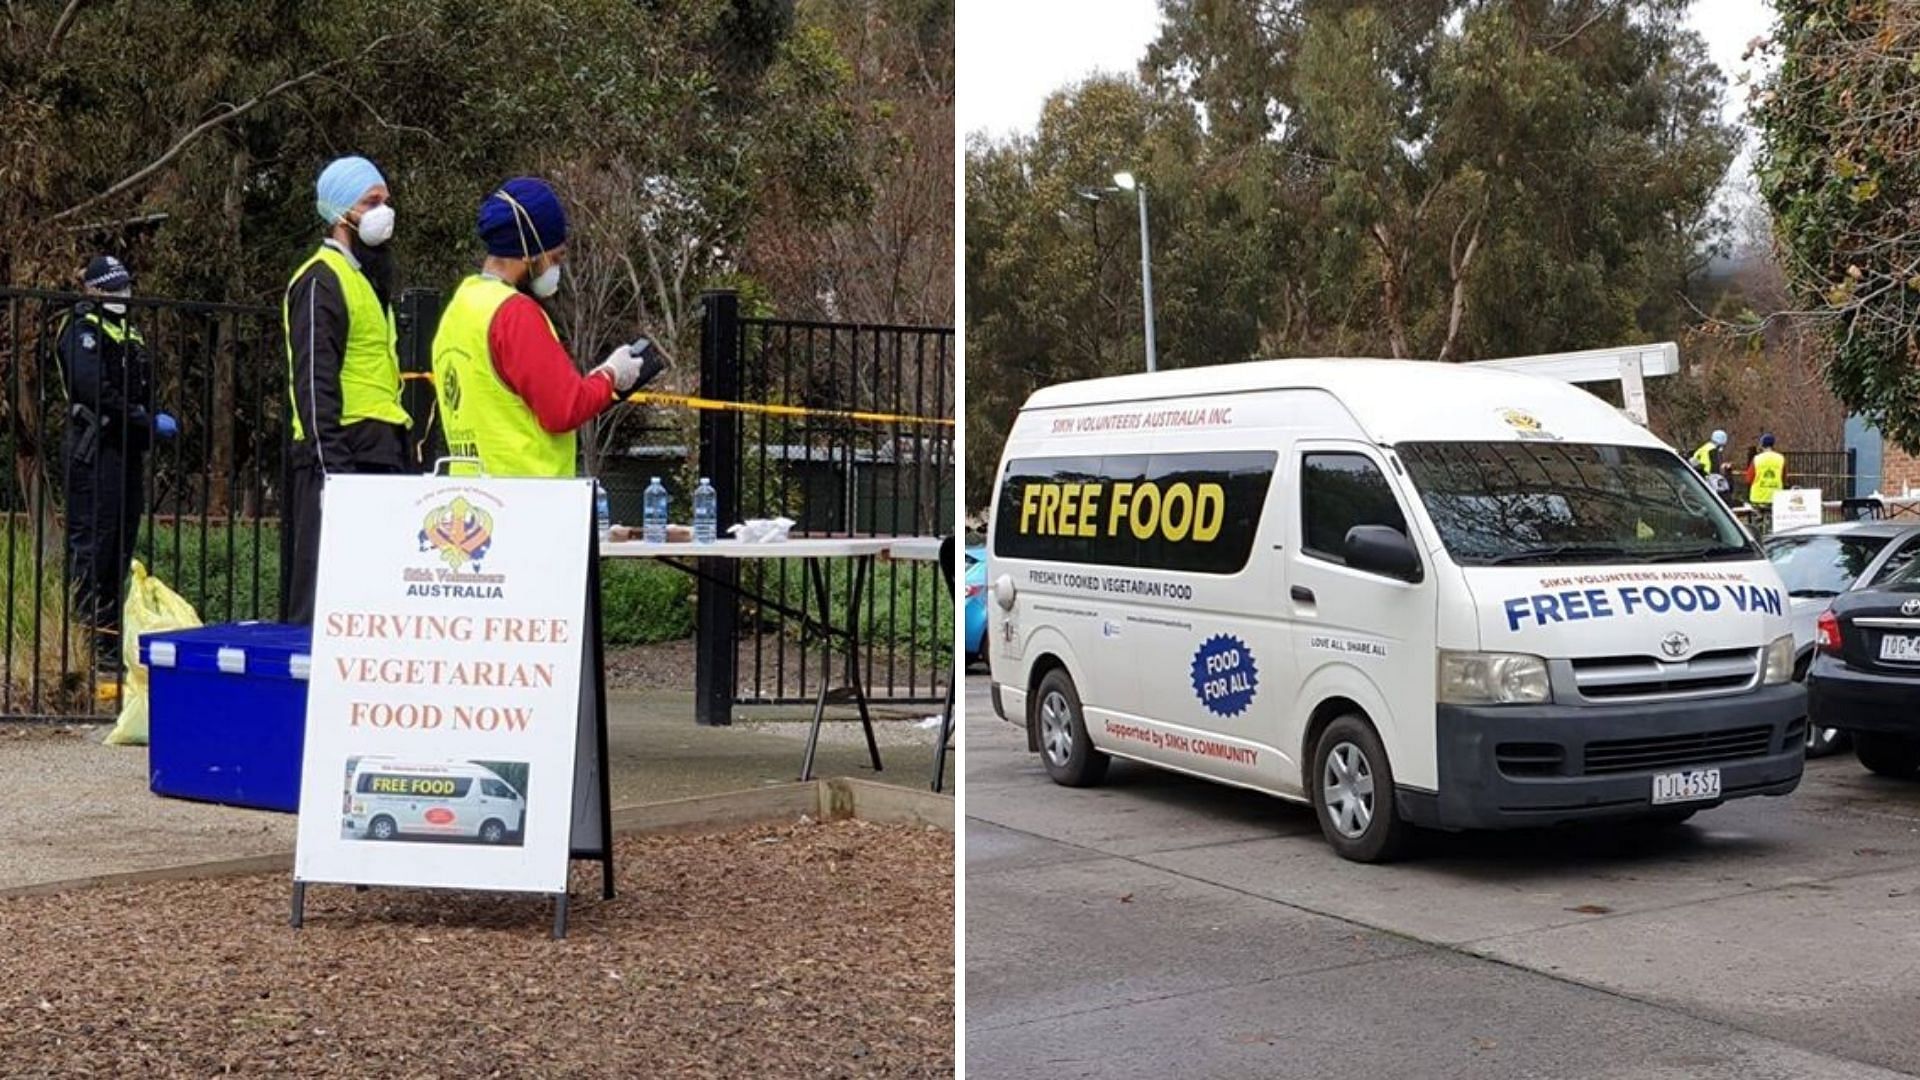 Sikh Community Australia has been helping people across Melbourne amid COVID.